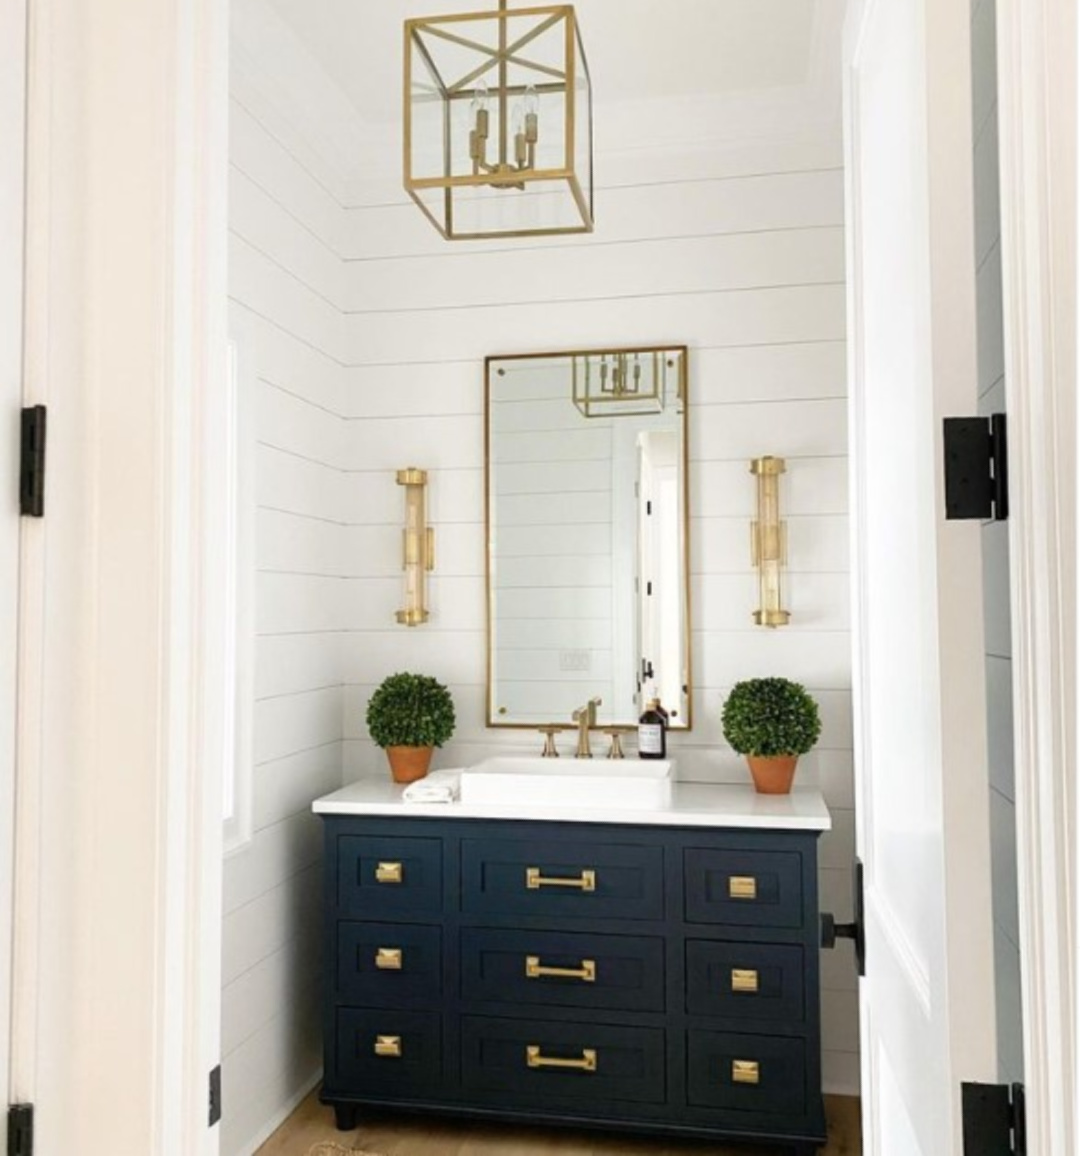 Bathroom with shiplap painted Chantilly Lace and brass hardware - @mlr.interiors. #bmchantillylace